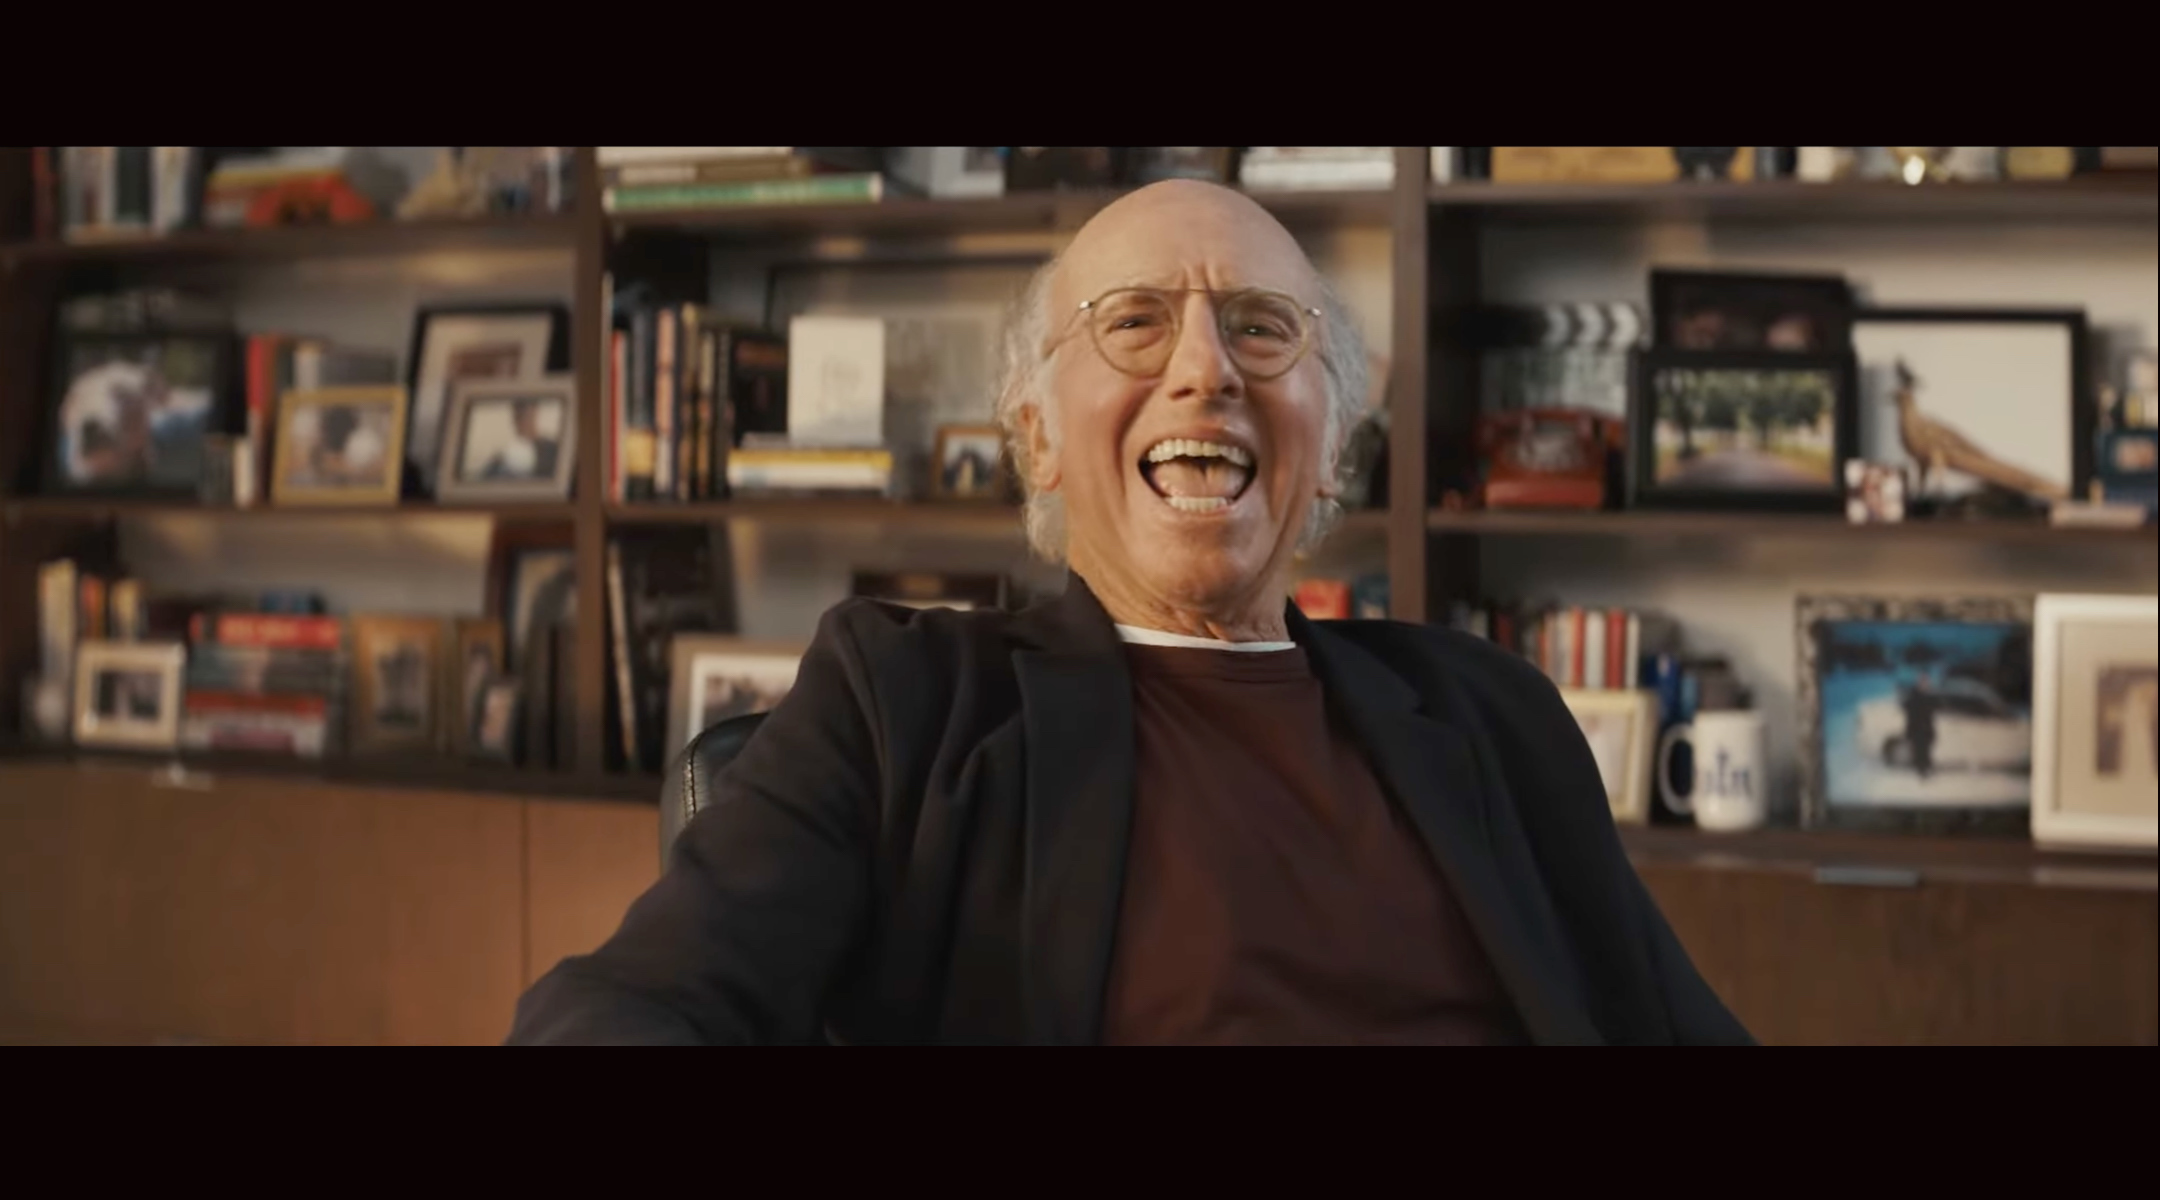 Larry David scoffs at the idea of investing in cryptocurrency in a Super Bowl ad for FTX that aired Feb. 13, 2022. (Screenshot via YouTube)